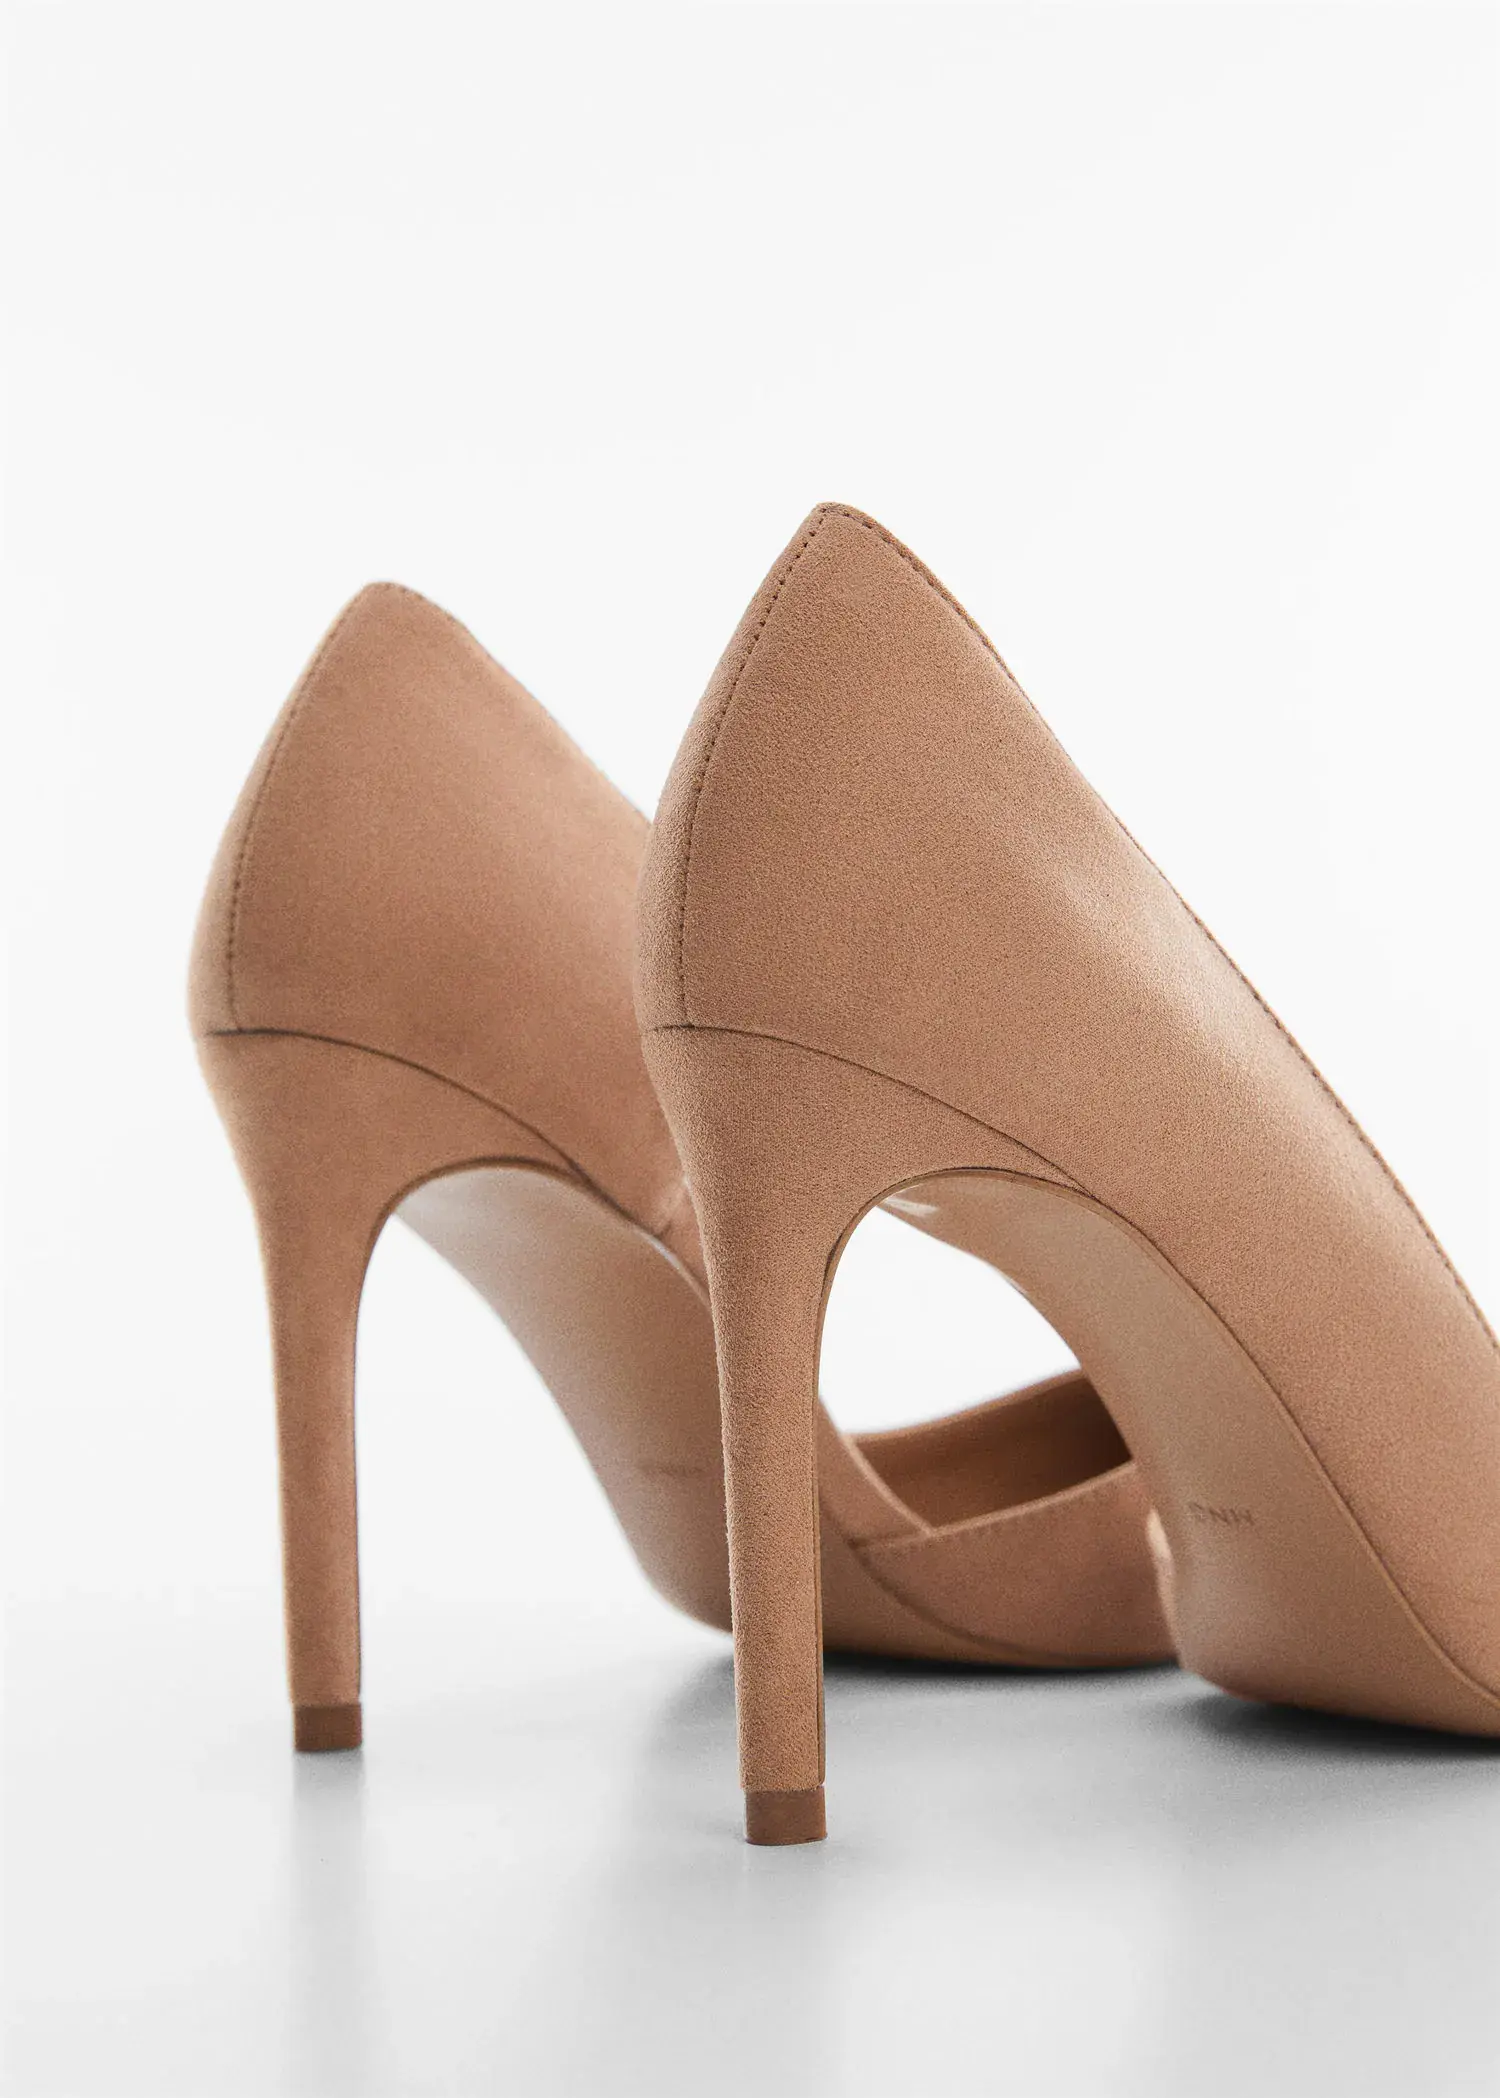 Mango Asymmetrical heeled shoes. a close up of a pair of high heeled shoes 